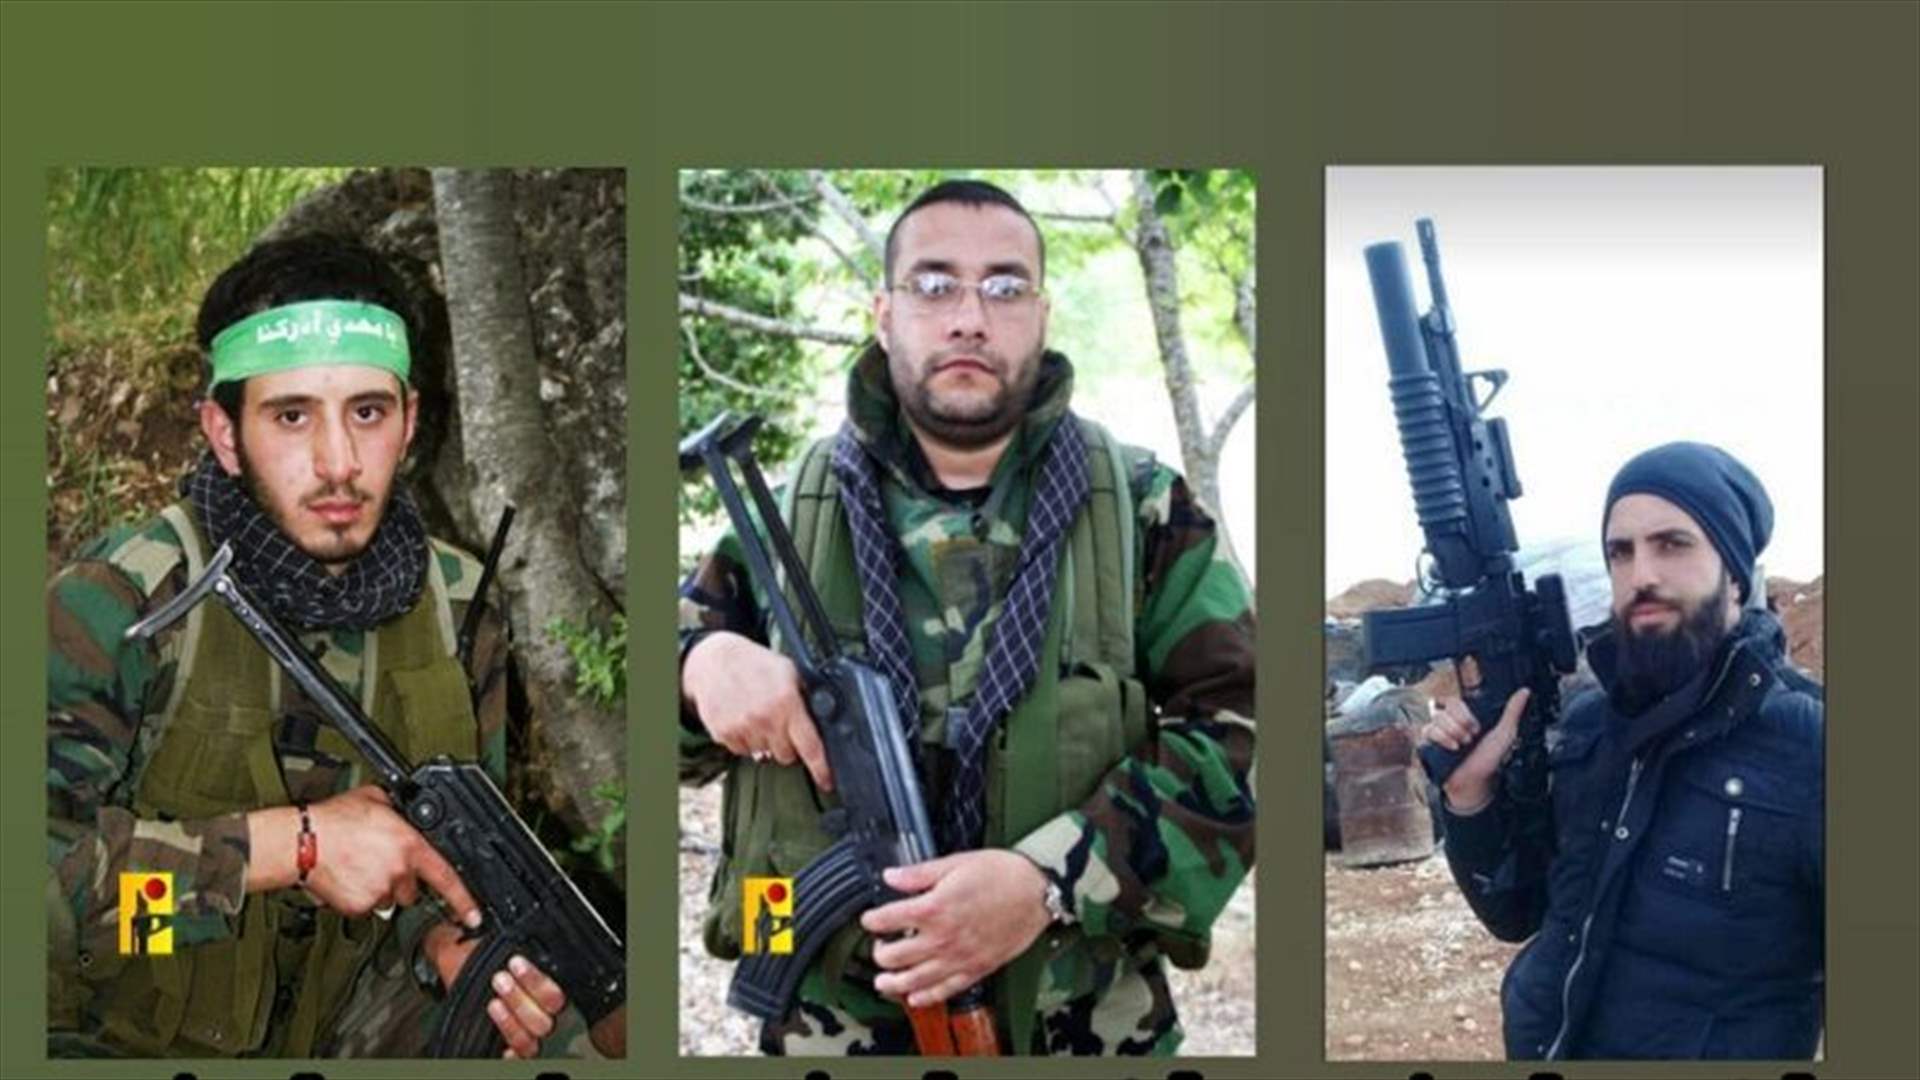 Officially: Three Hezbollah martyrs due to Israeli shelling in South Lebanon